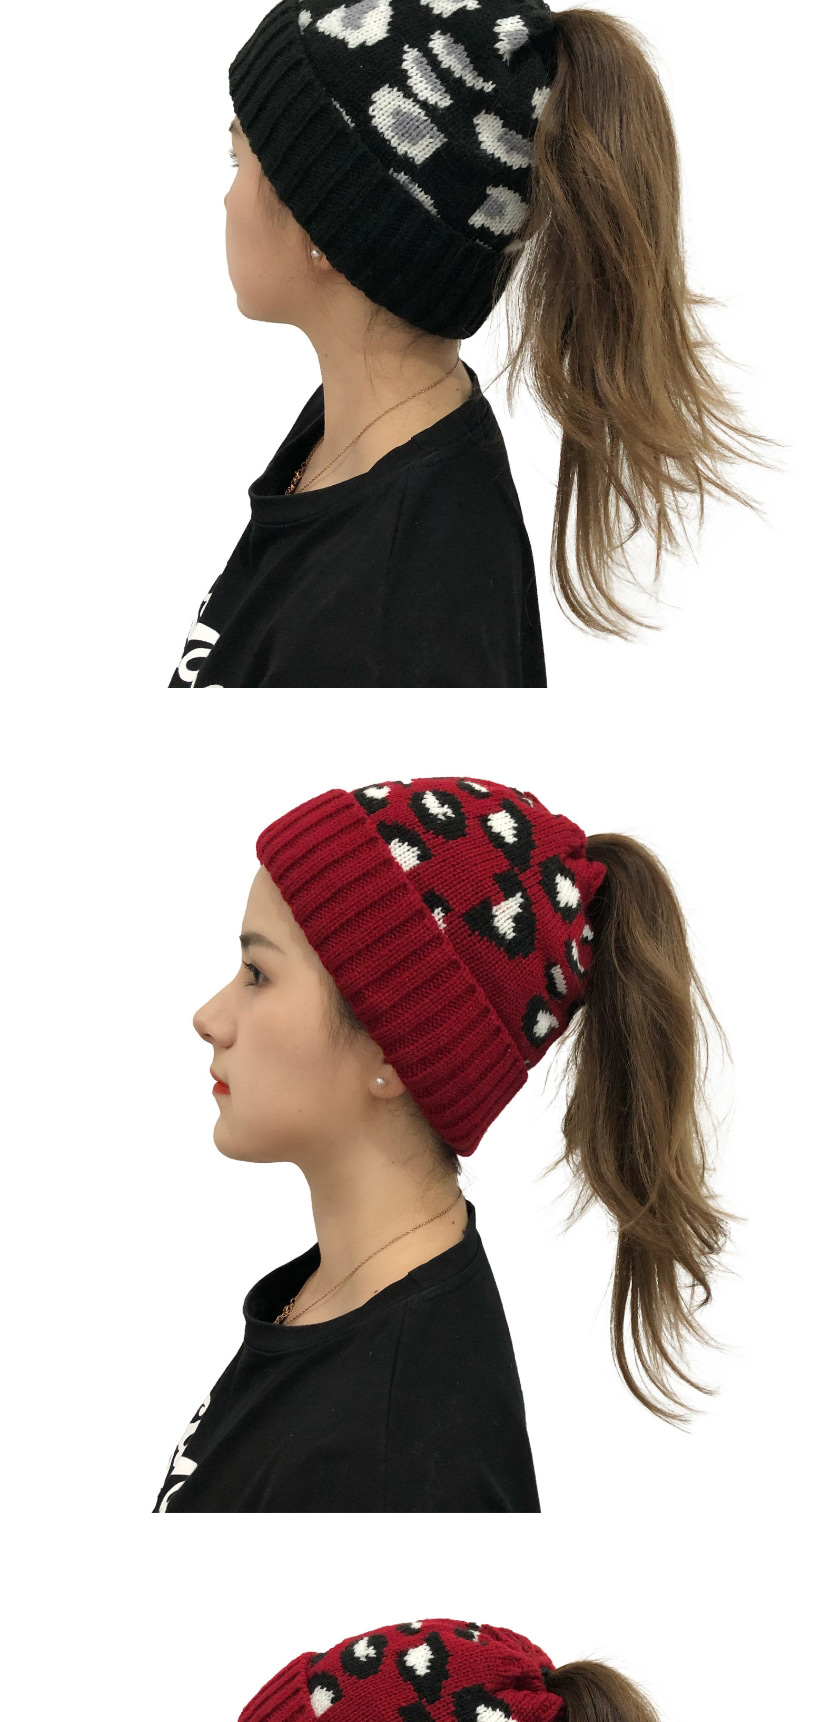 Fashion Camel Leopard Jacquard Ponytail Knitted Beanie,Knitting Wool Hats